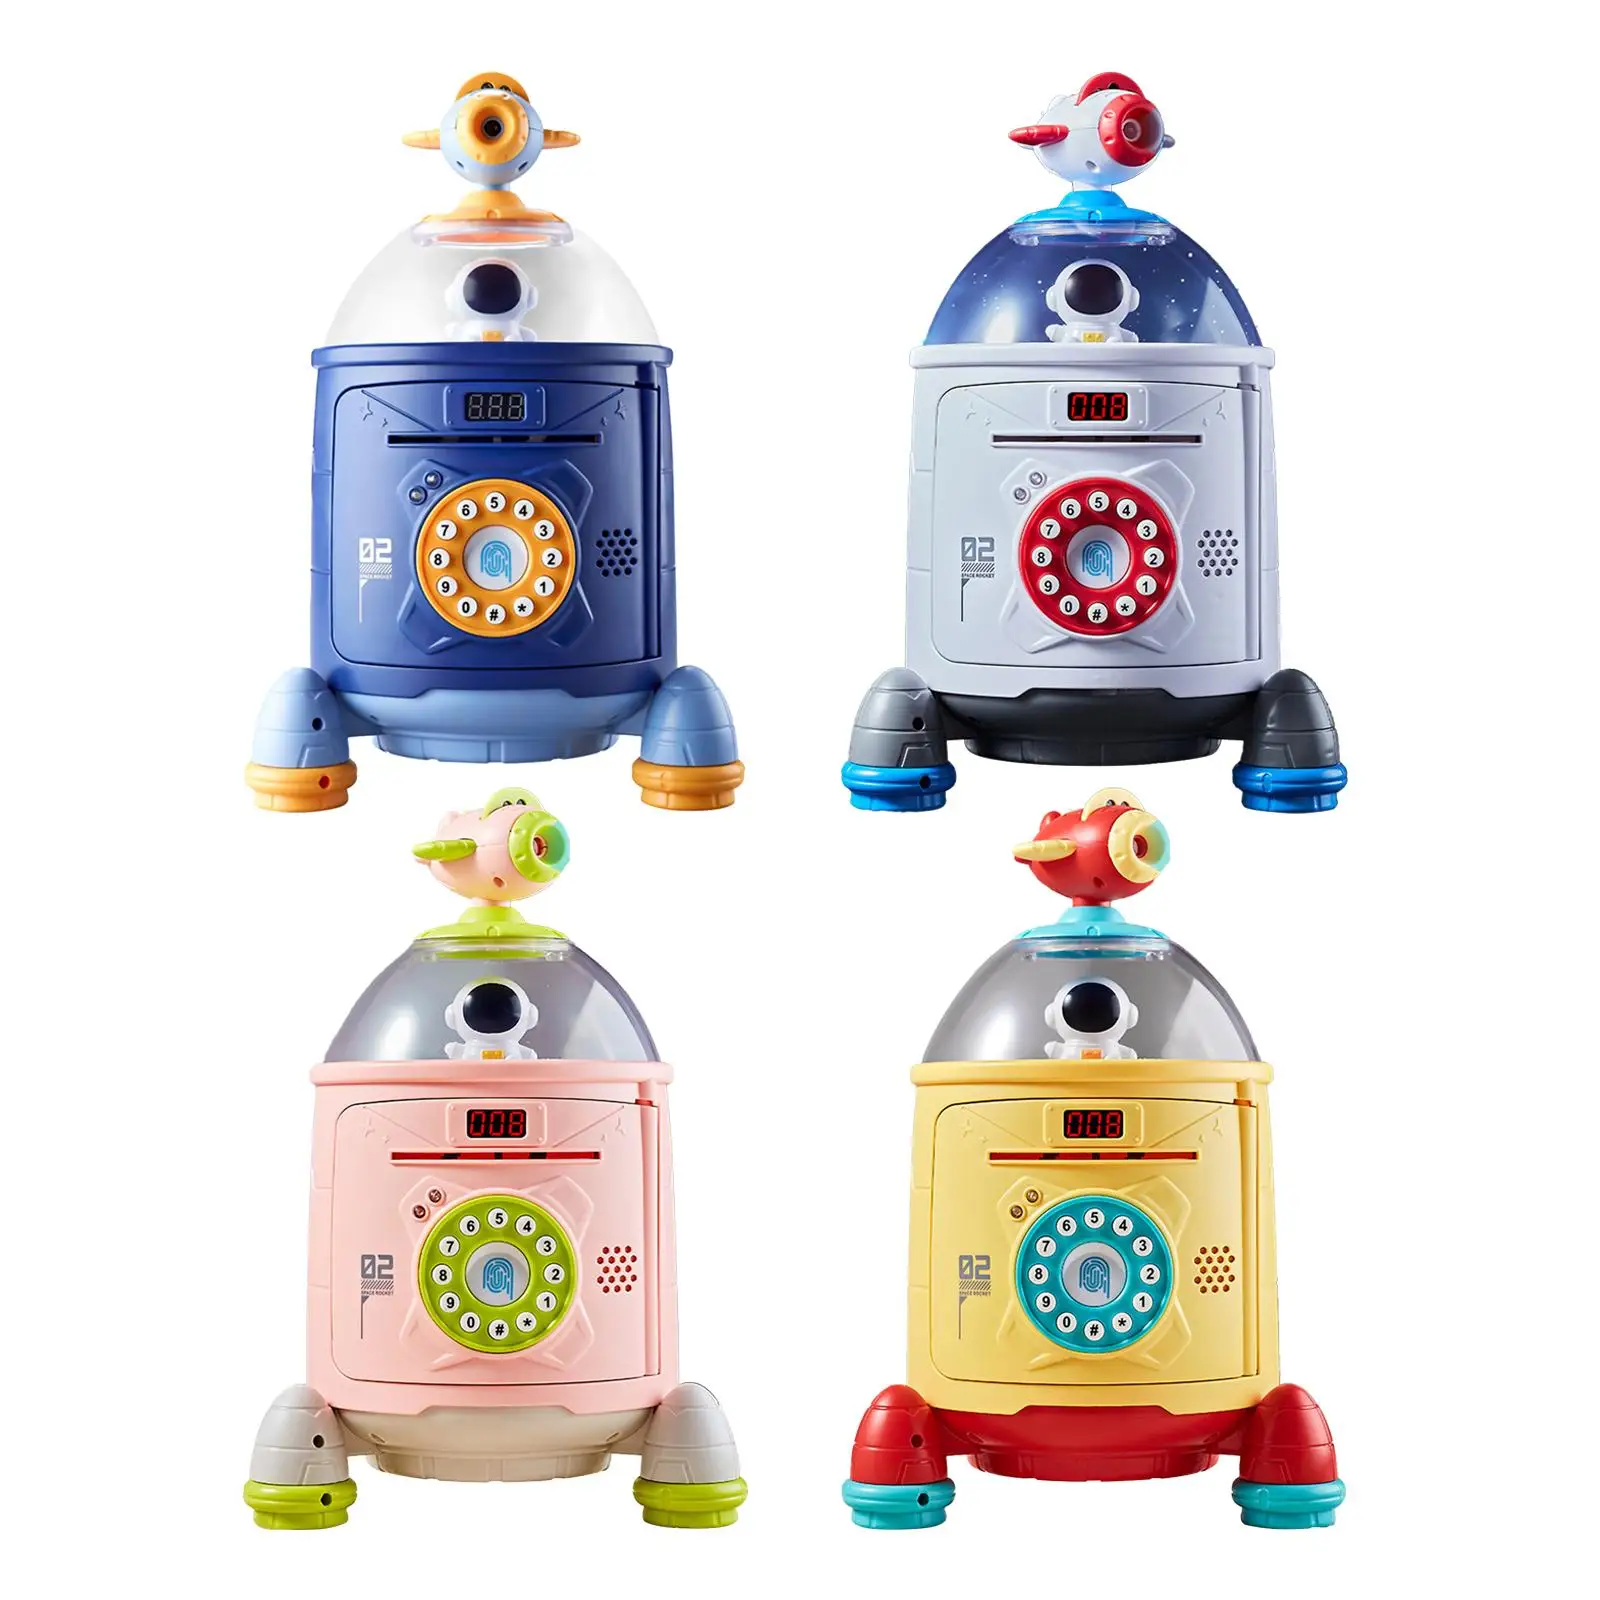 Rocket Piggy Bank Creative Party Favor Money Savings Bank Home Decoration Safe Educational Toy for Adults Age 3-8 Years Children